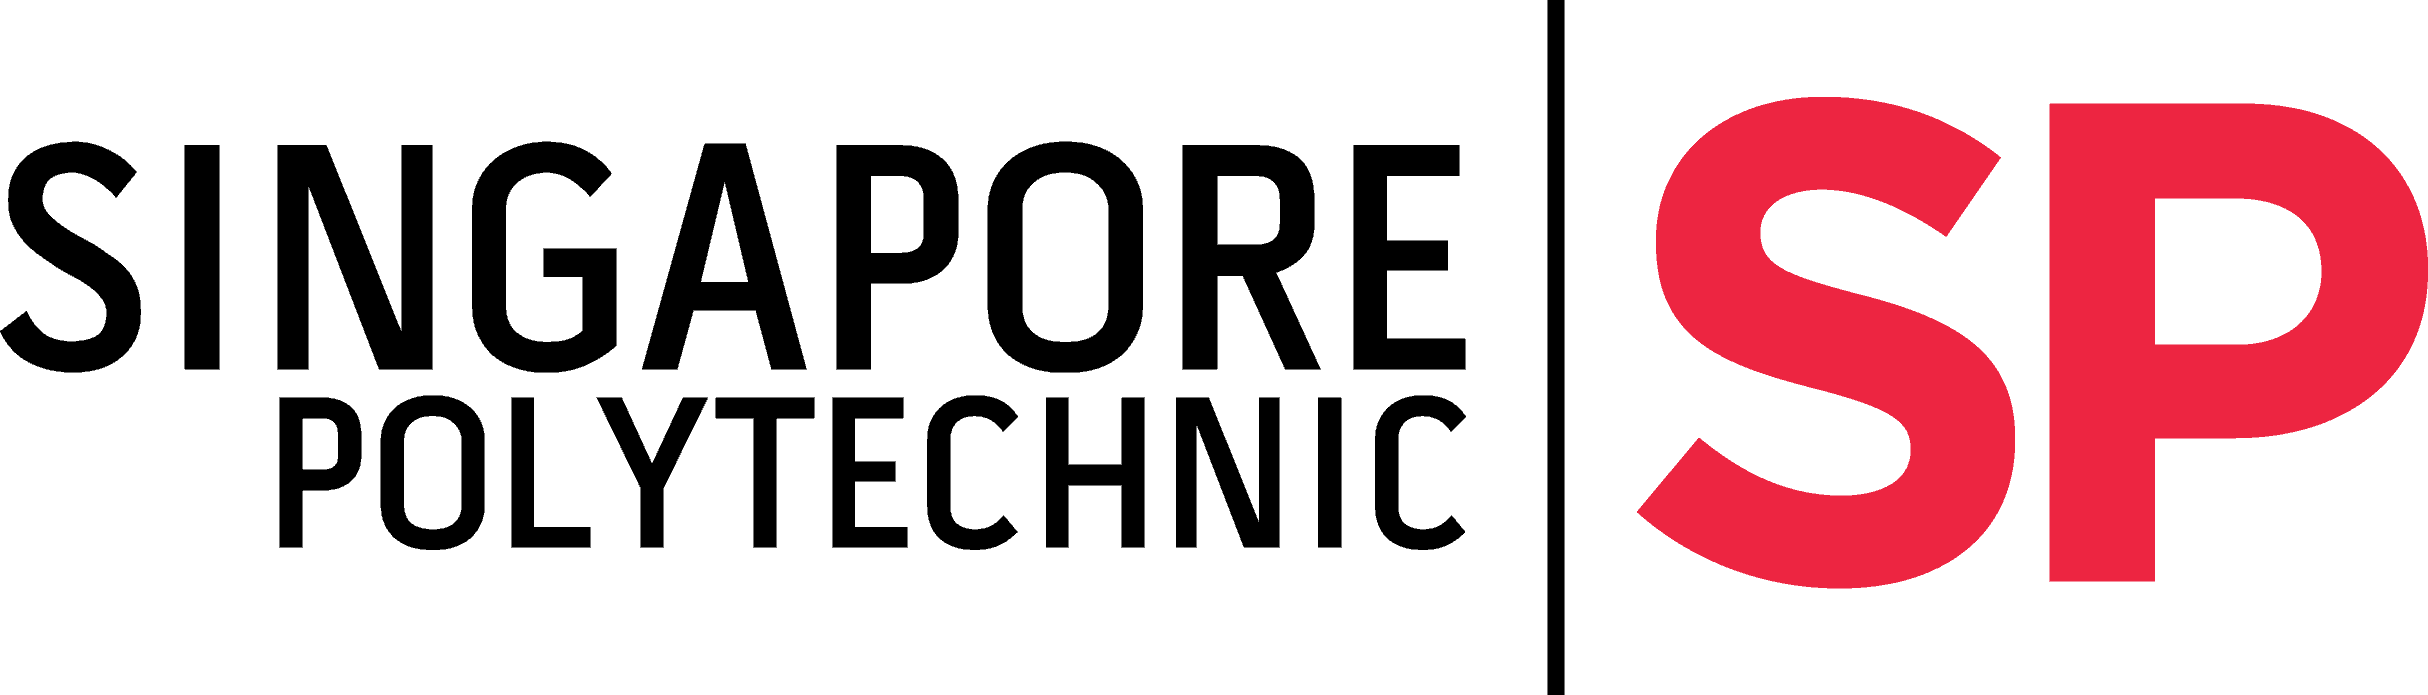 Singapore polytechnic logo on a red background.